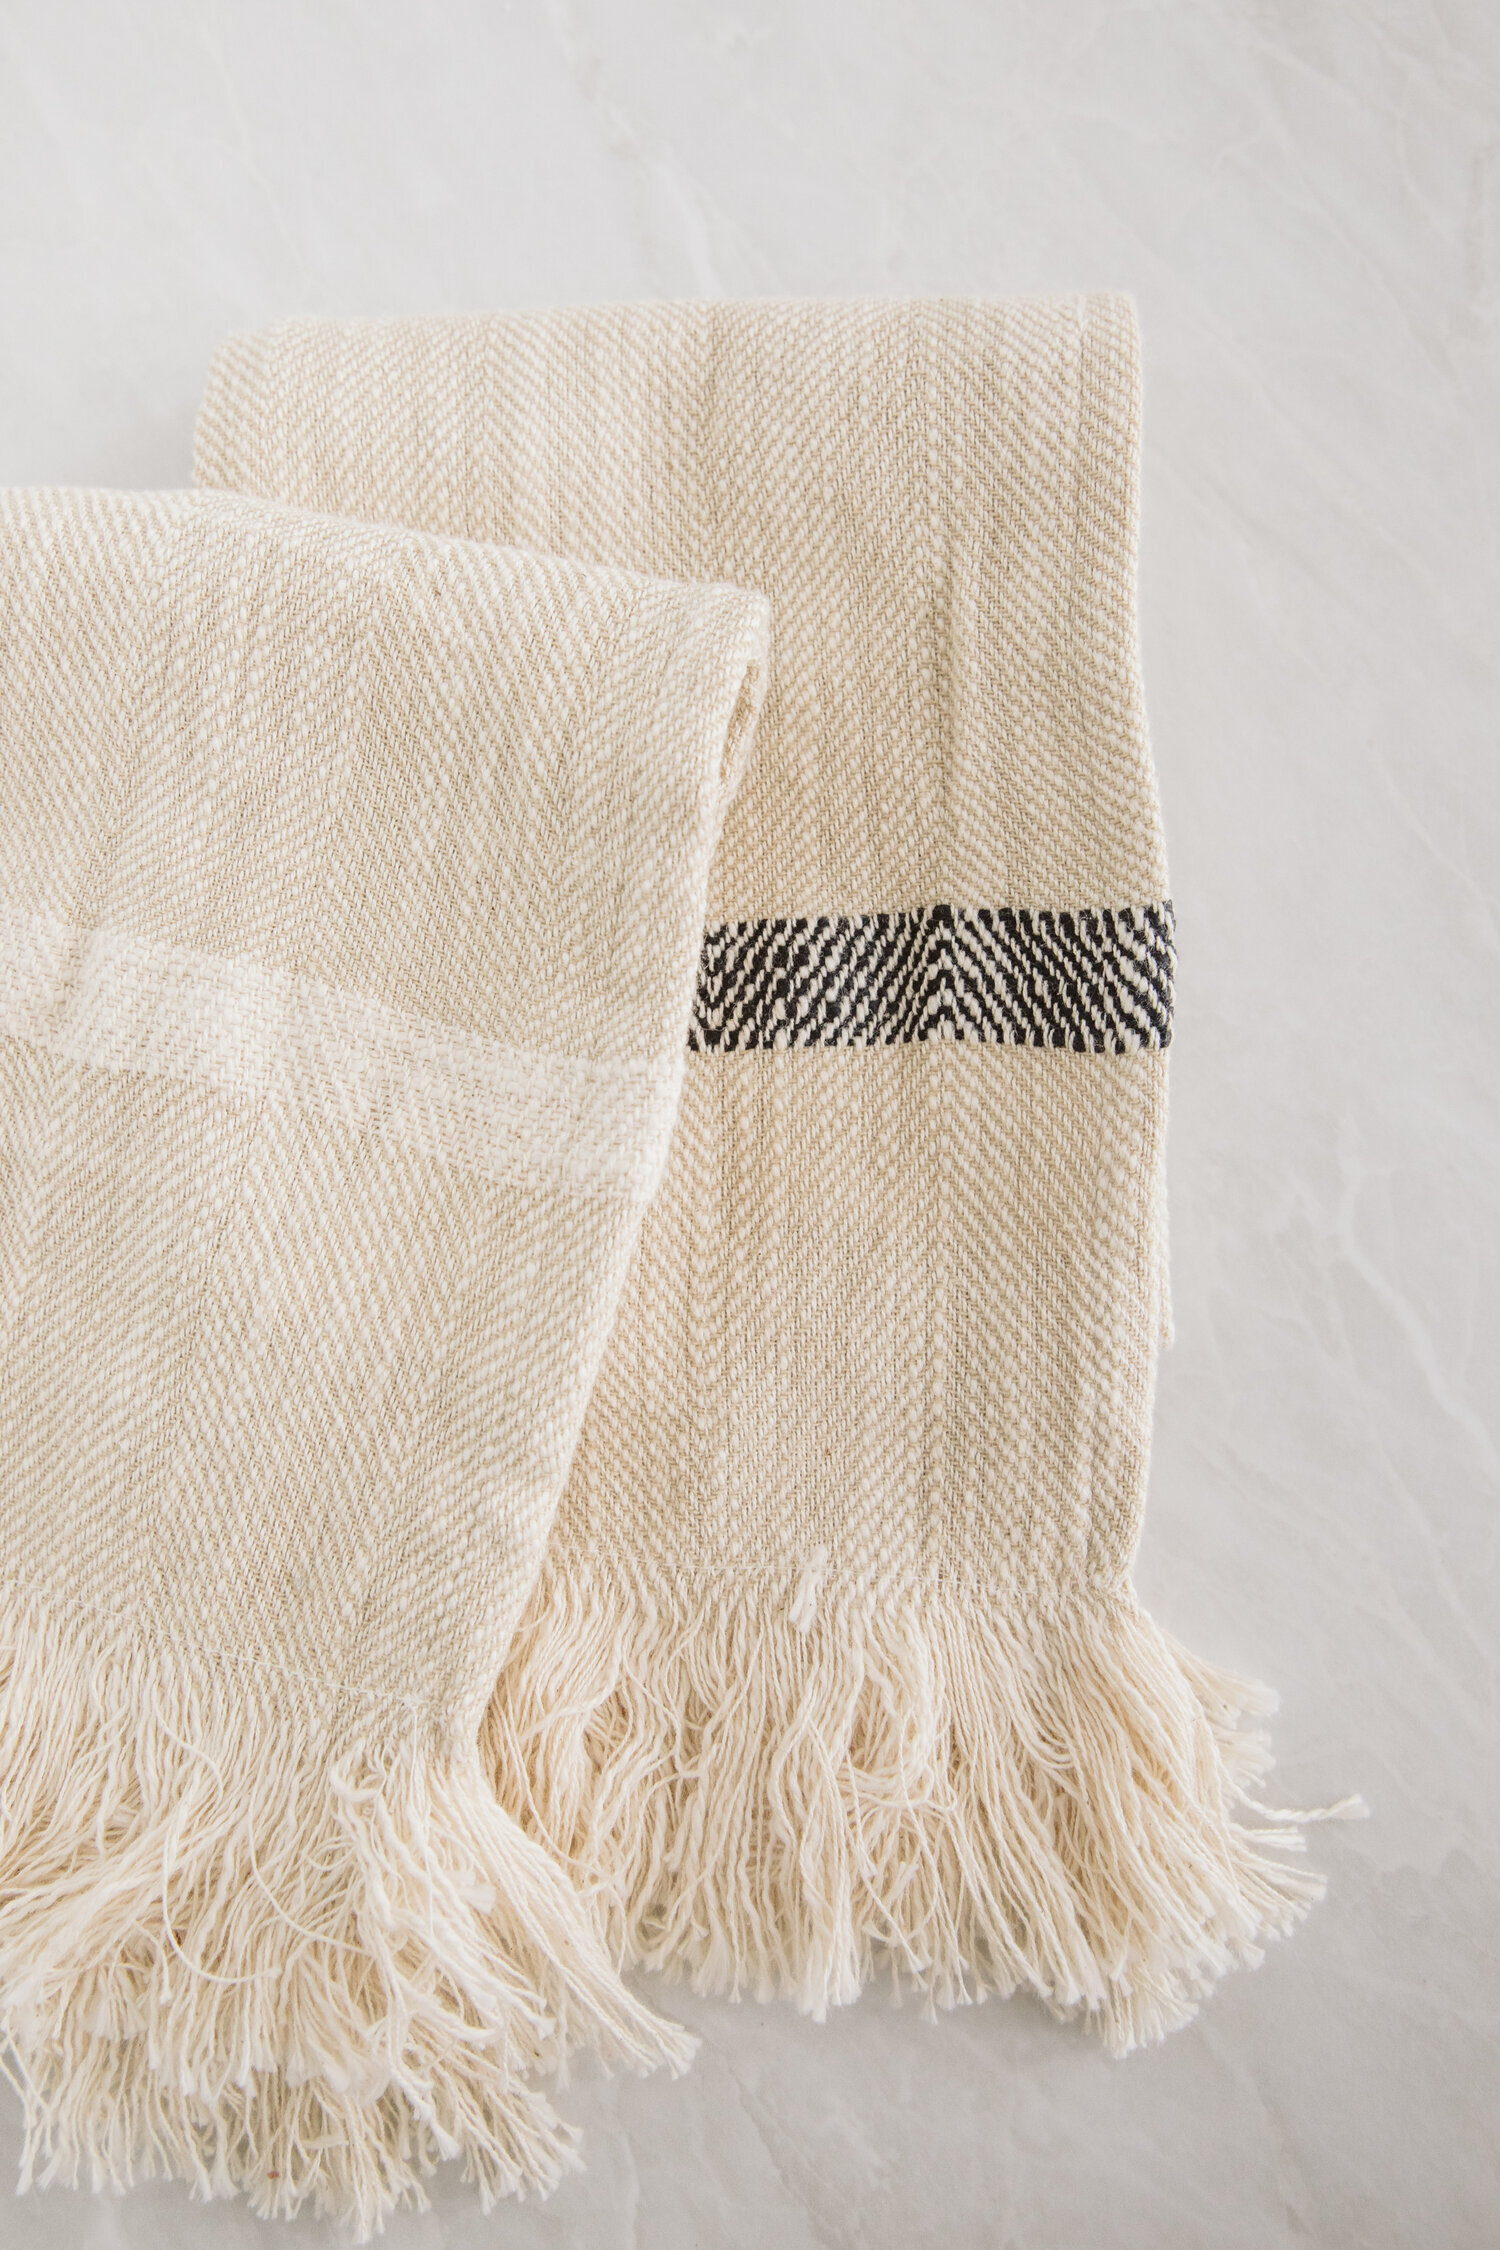 Natural + Striped Woven Cotton Tea Towels with Fringe